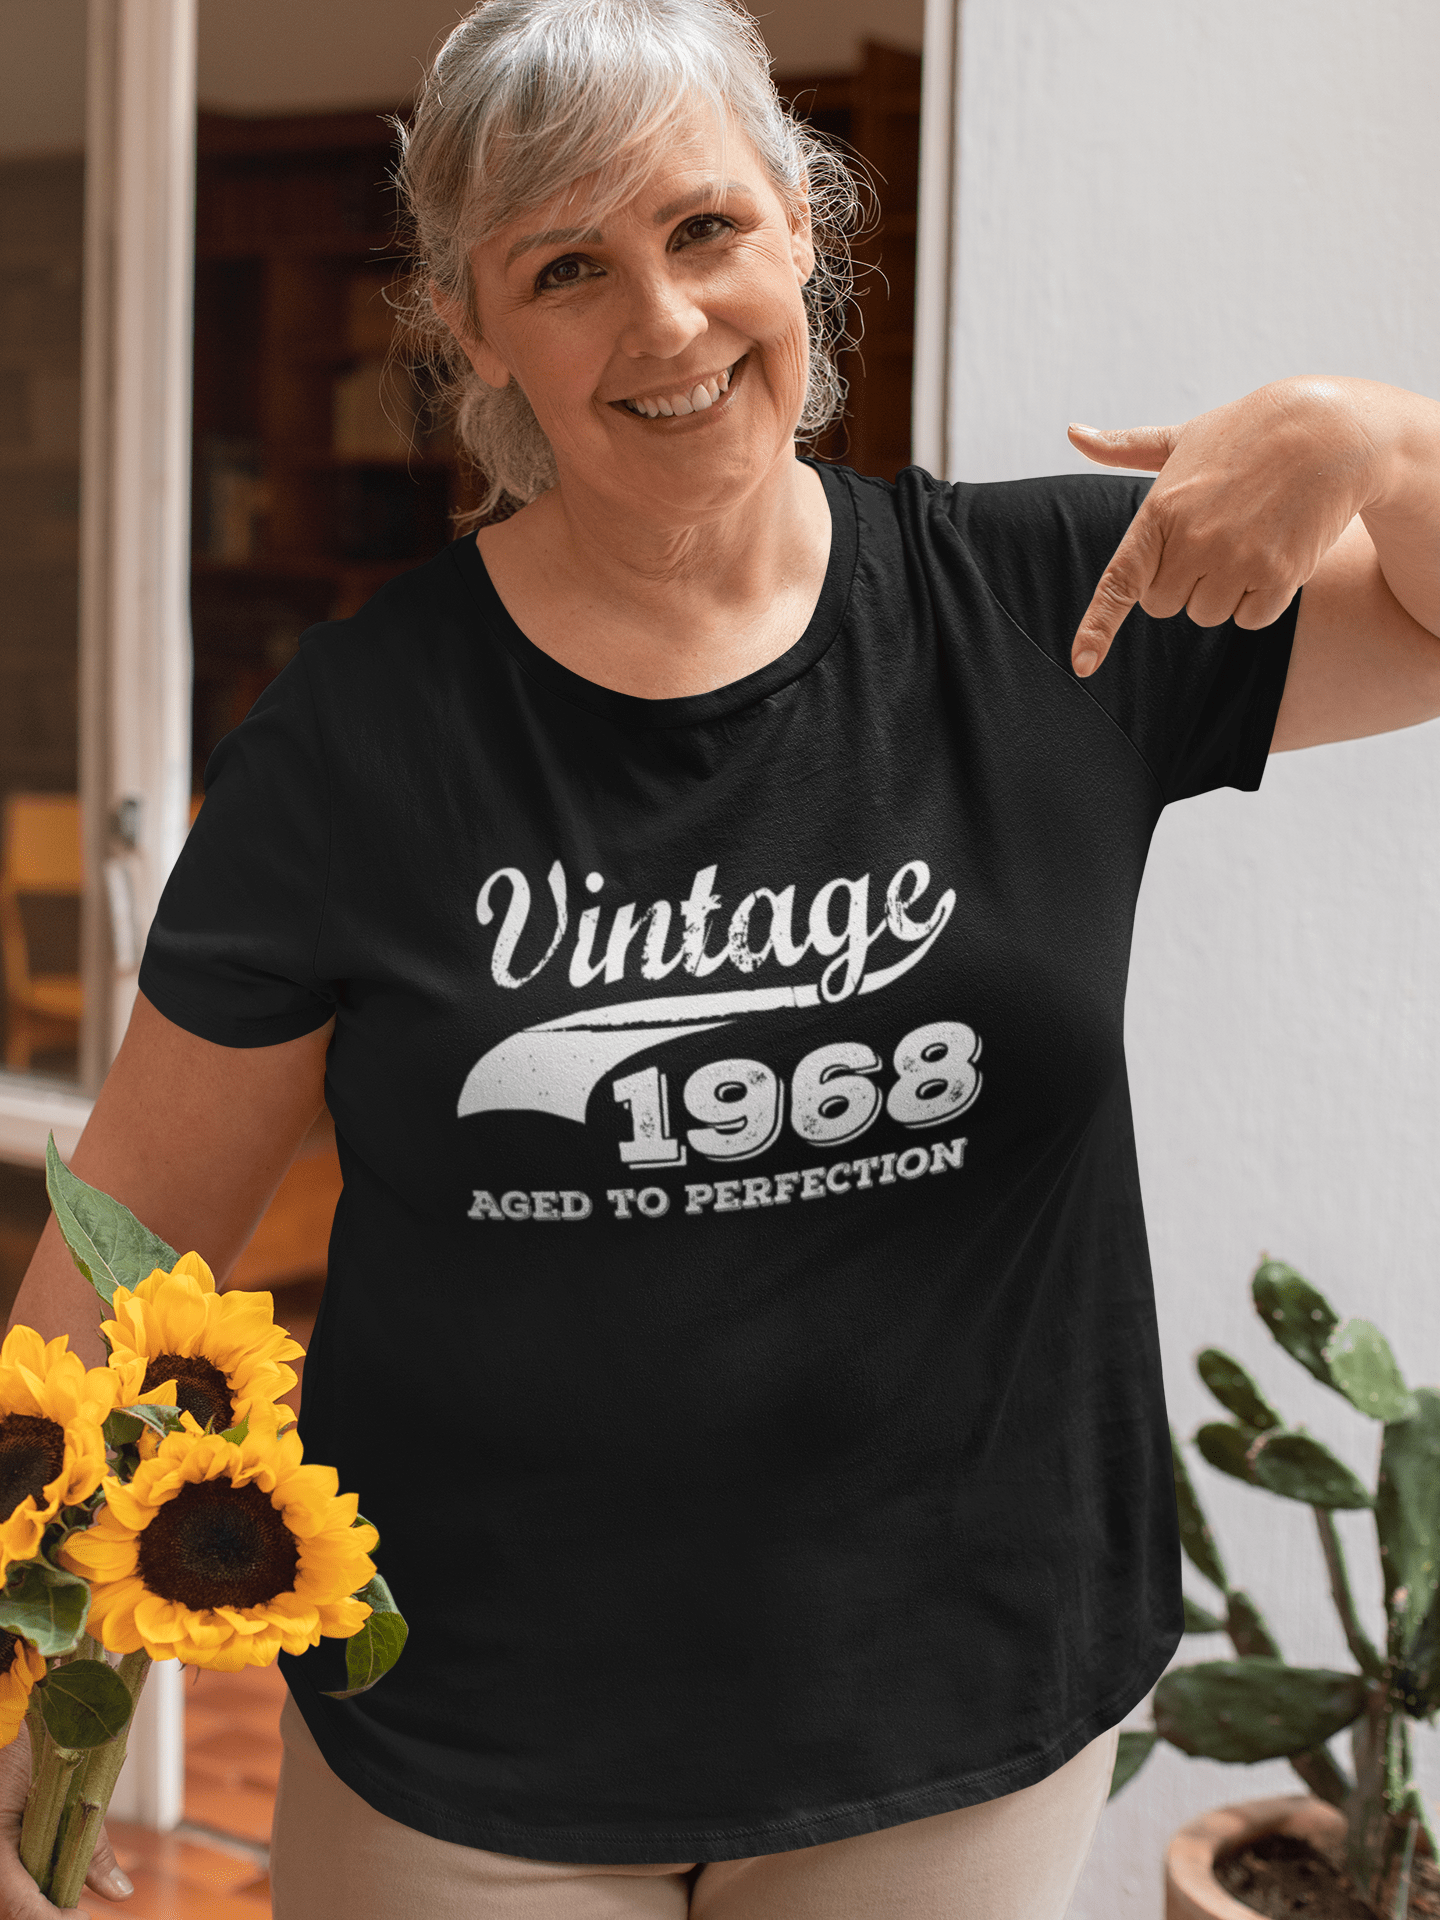 Vintage Aged to Perfection 1968, Black, Women's Short Sleeve Round Neck T-shirt, gift t-shirt 00345